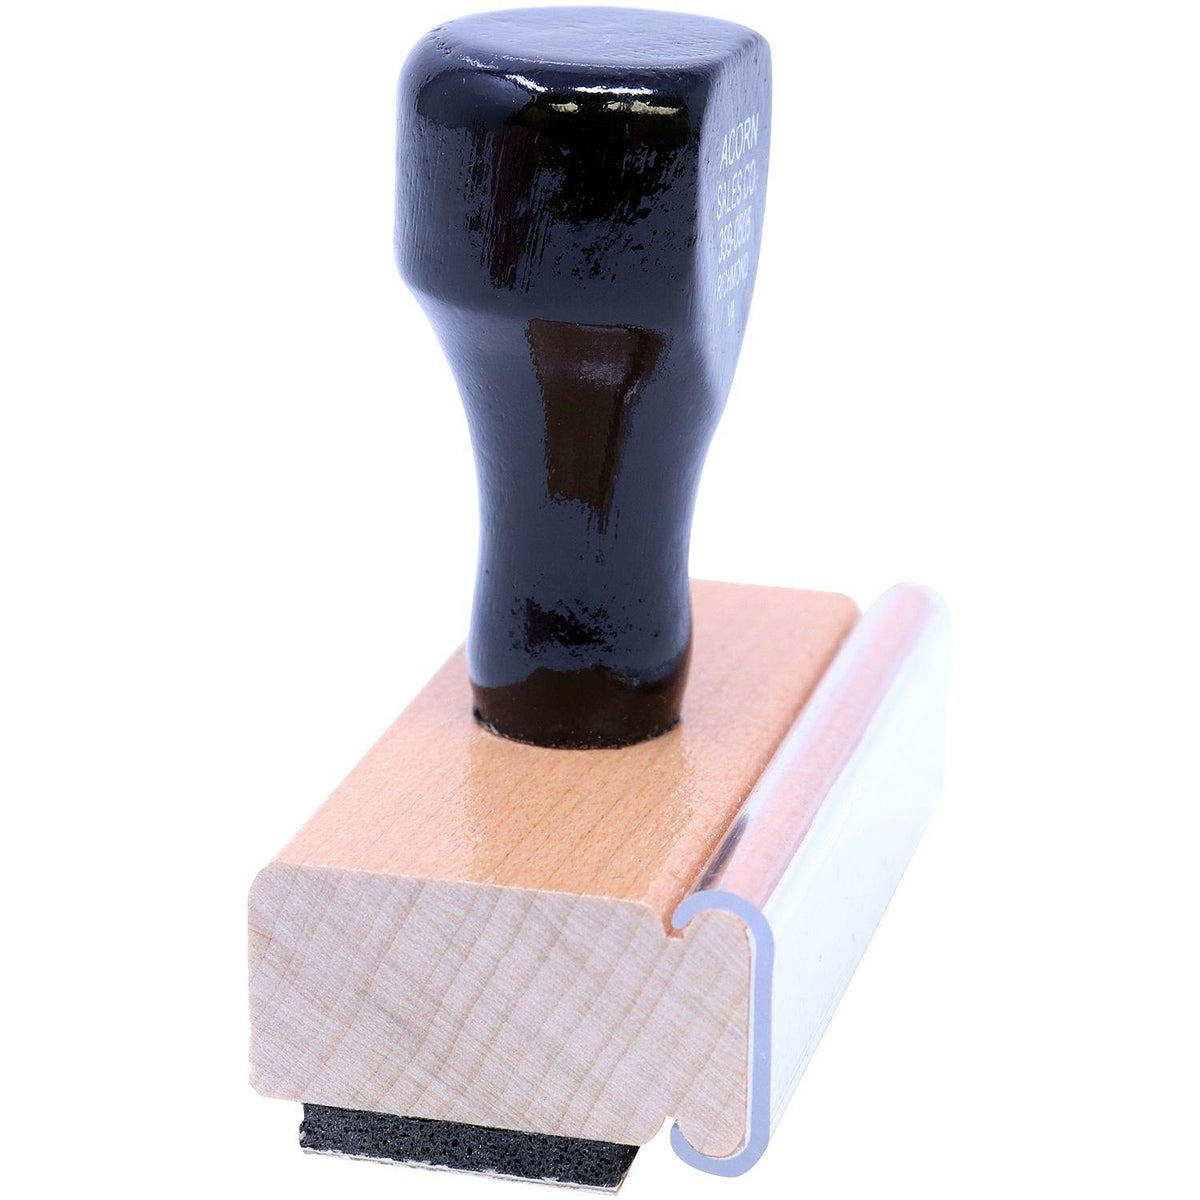 Side View of Large Medical Personnel Only Rubber Stamp at an Angle